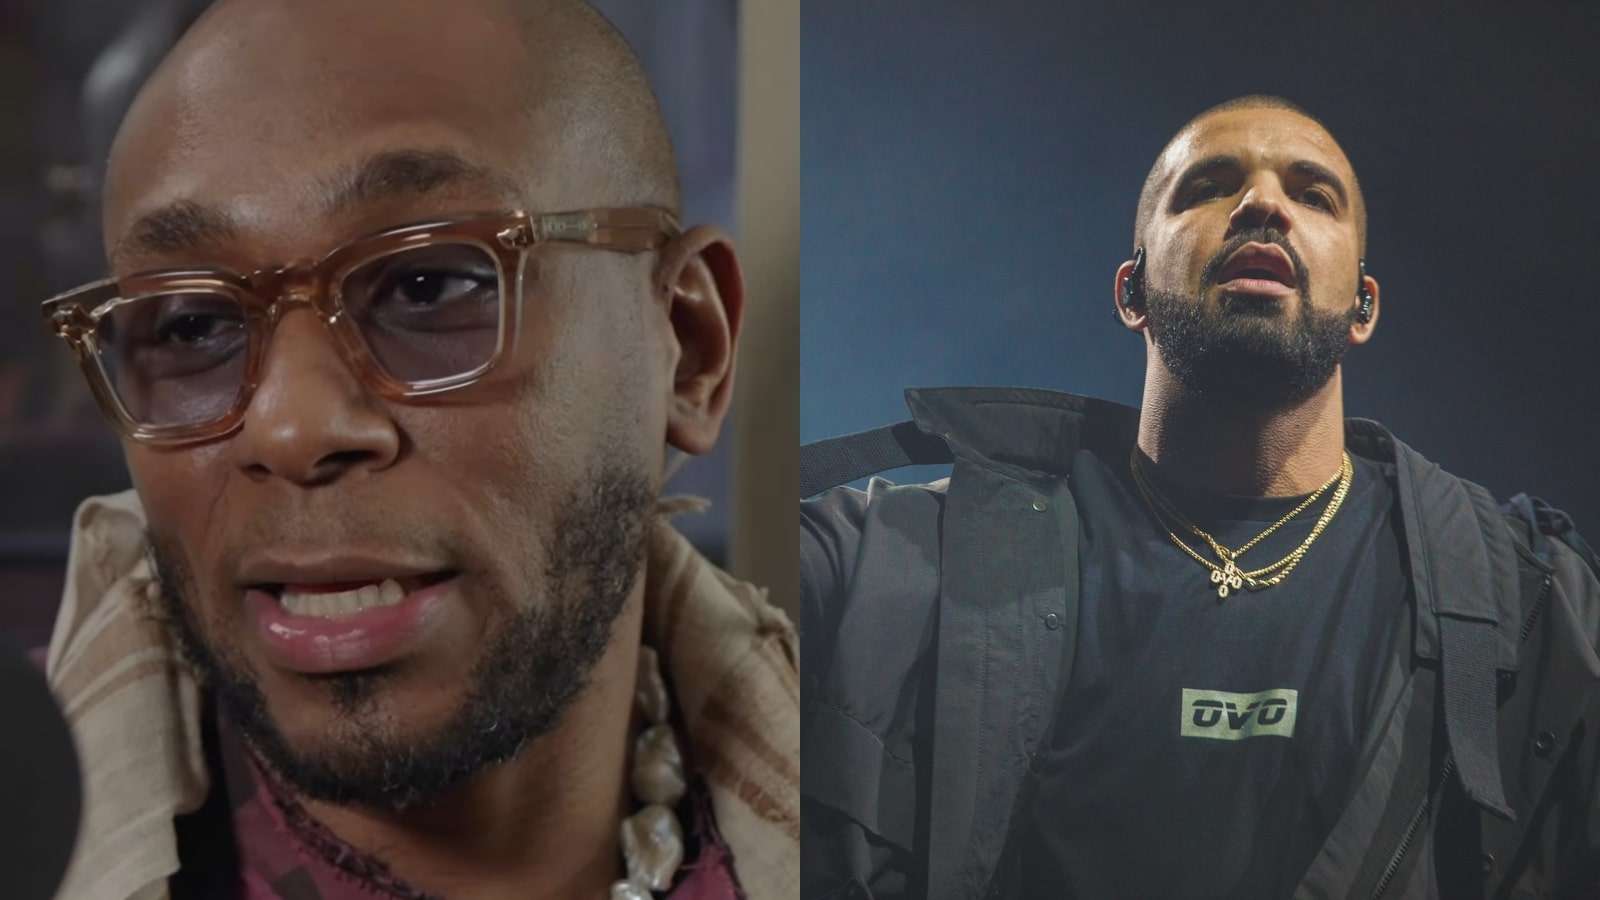 Mos Def and Drake in a side-by-side photo